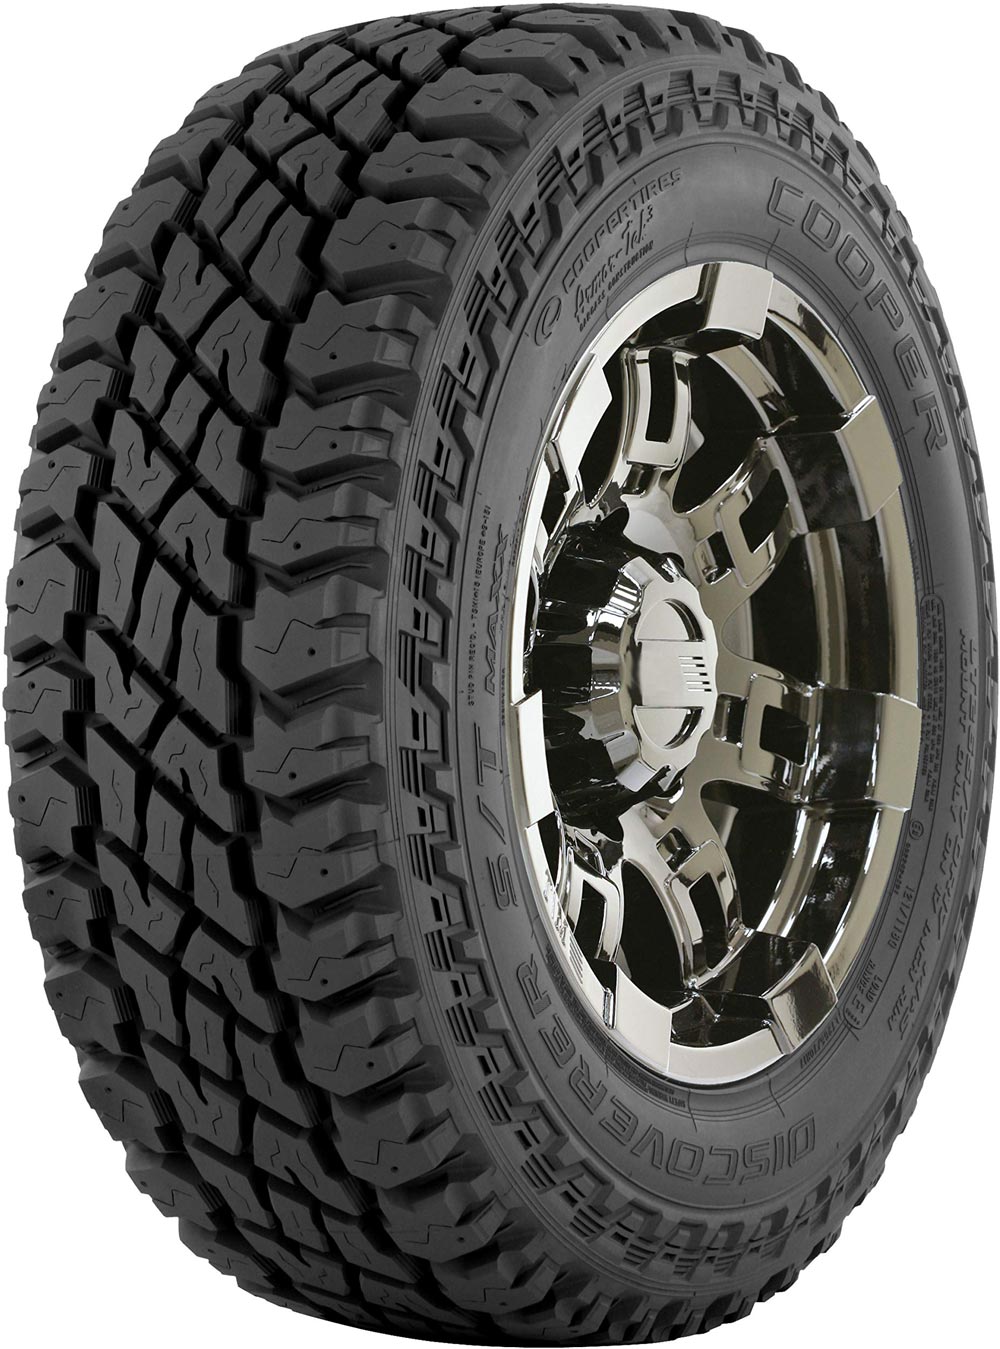 COOPER DISCOVERER ST MAXX P O BSW 305/65 R17 121Q